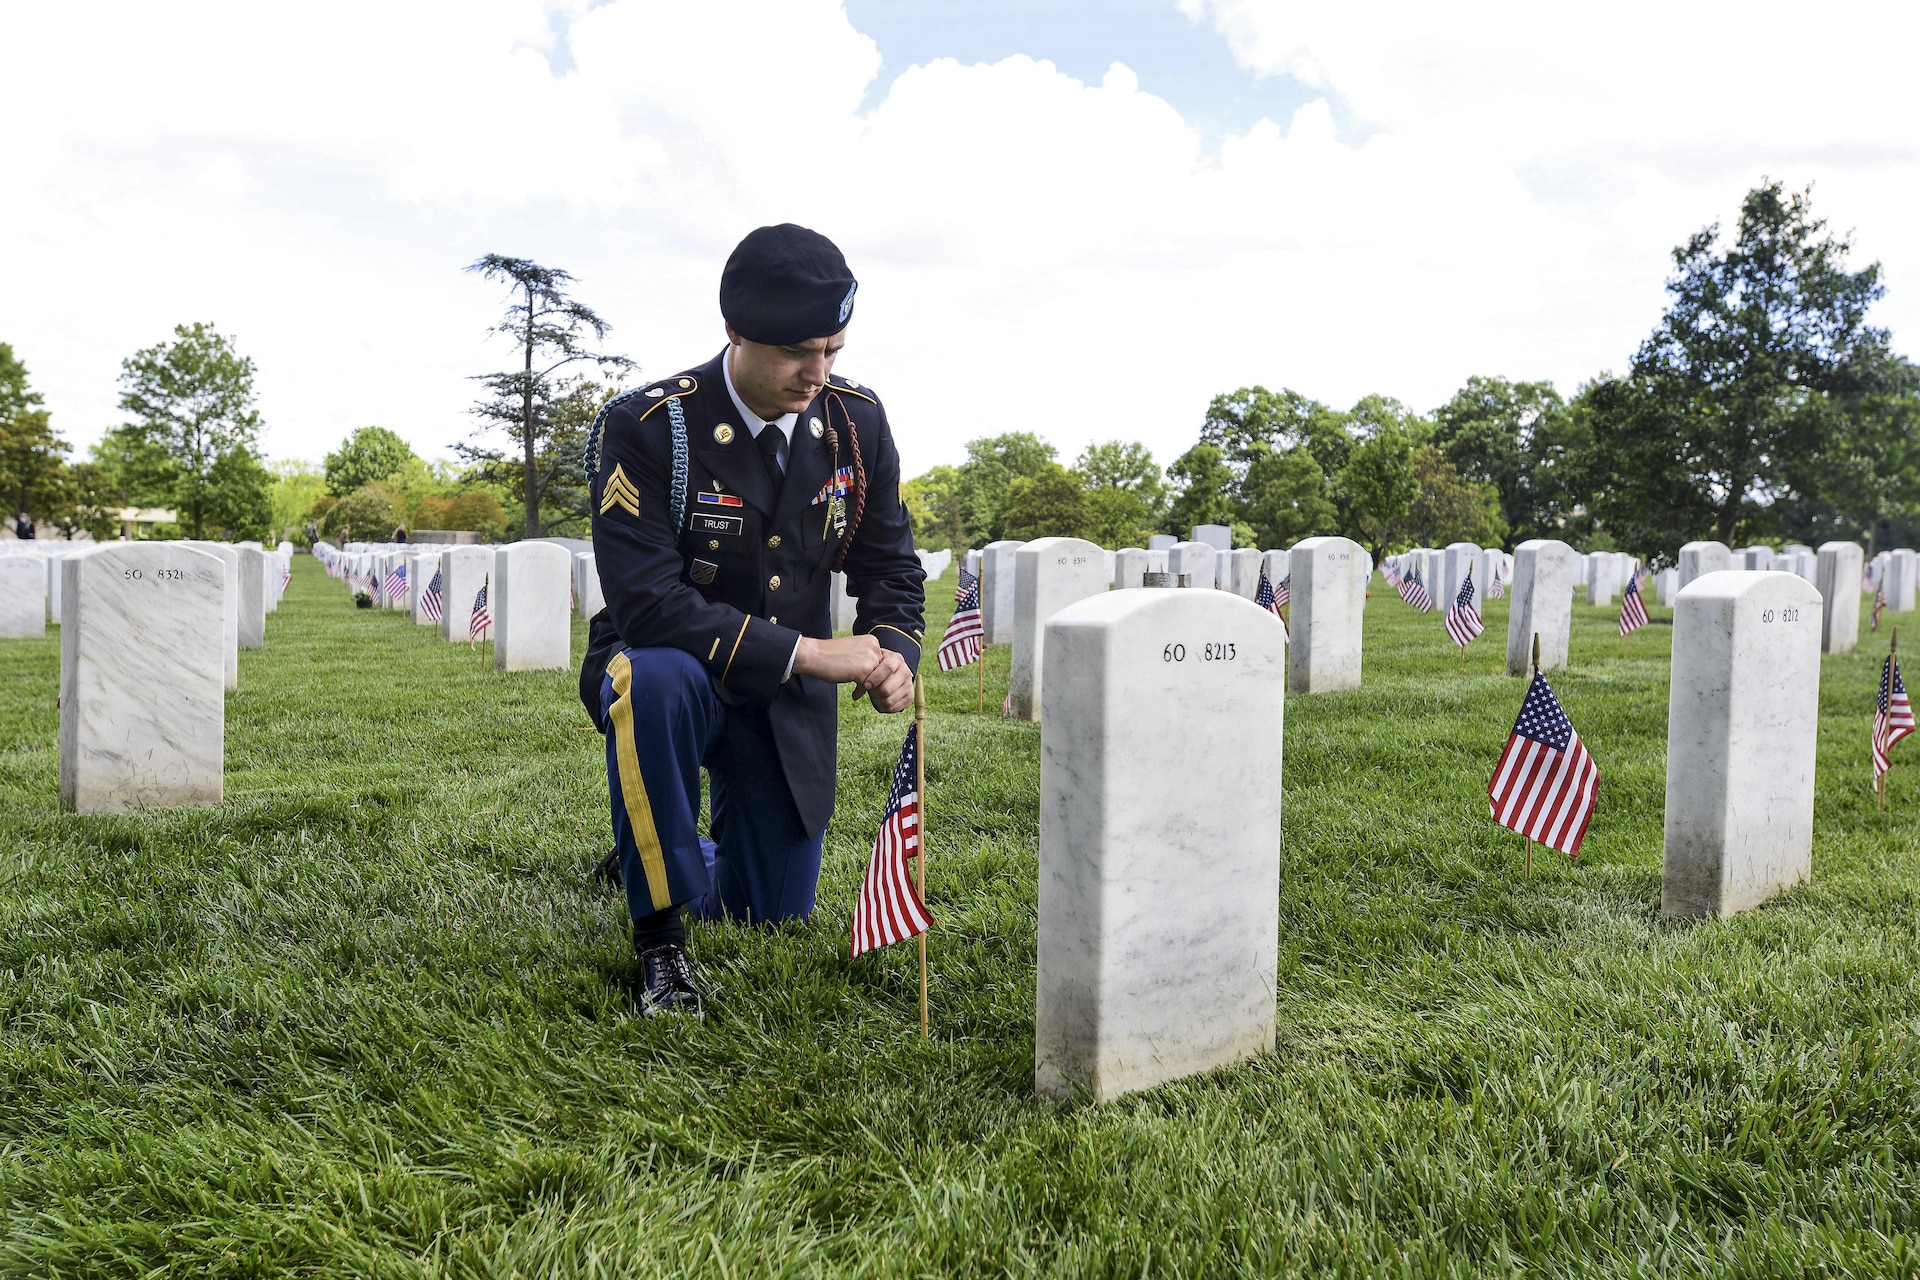 Army Sgt. Daniel Trust pays respects to his close friend, Army Capt. Jeremy A. Chandler, who was killed in action during Operation Enduring Freedom during  the Flags In ceremony at Arlington National Cemetery in Arlington, Va., May 25, 2017. DoD photo by Sebastian J. Sciotti Jr.
